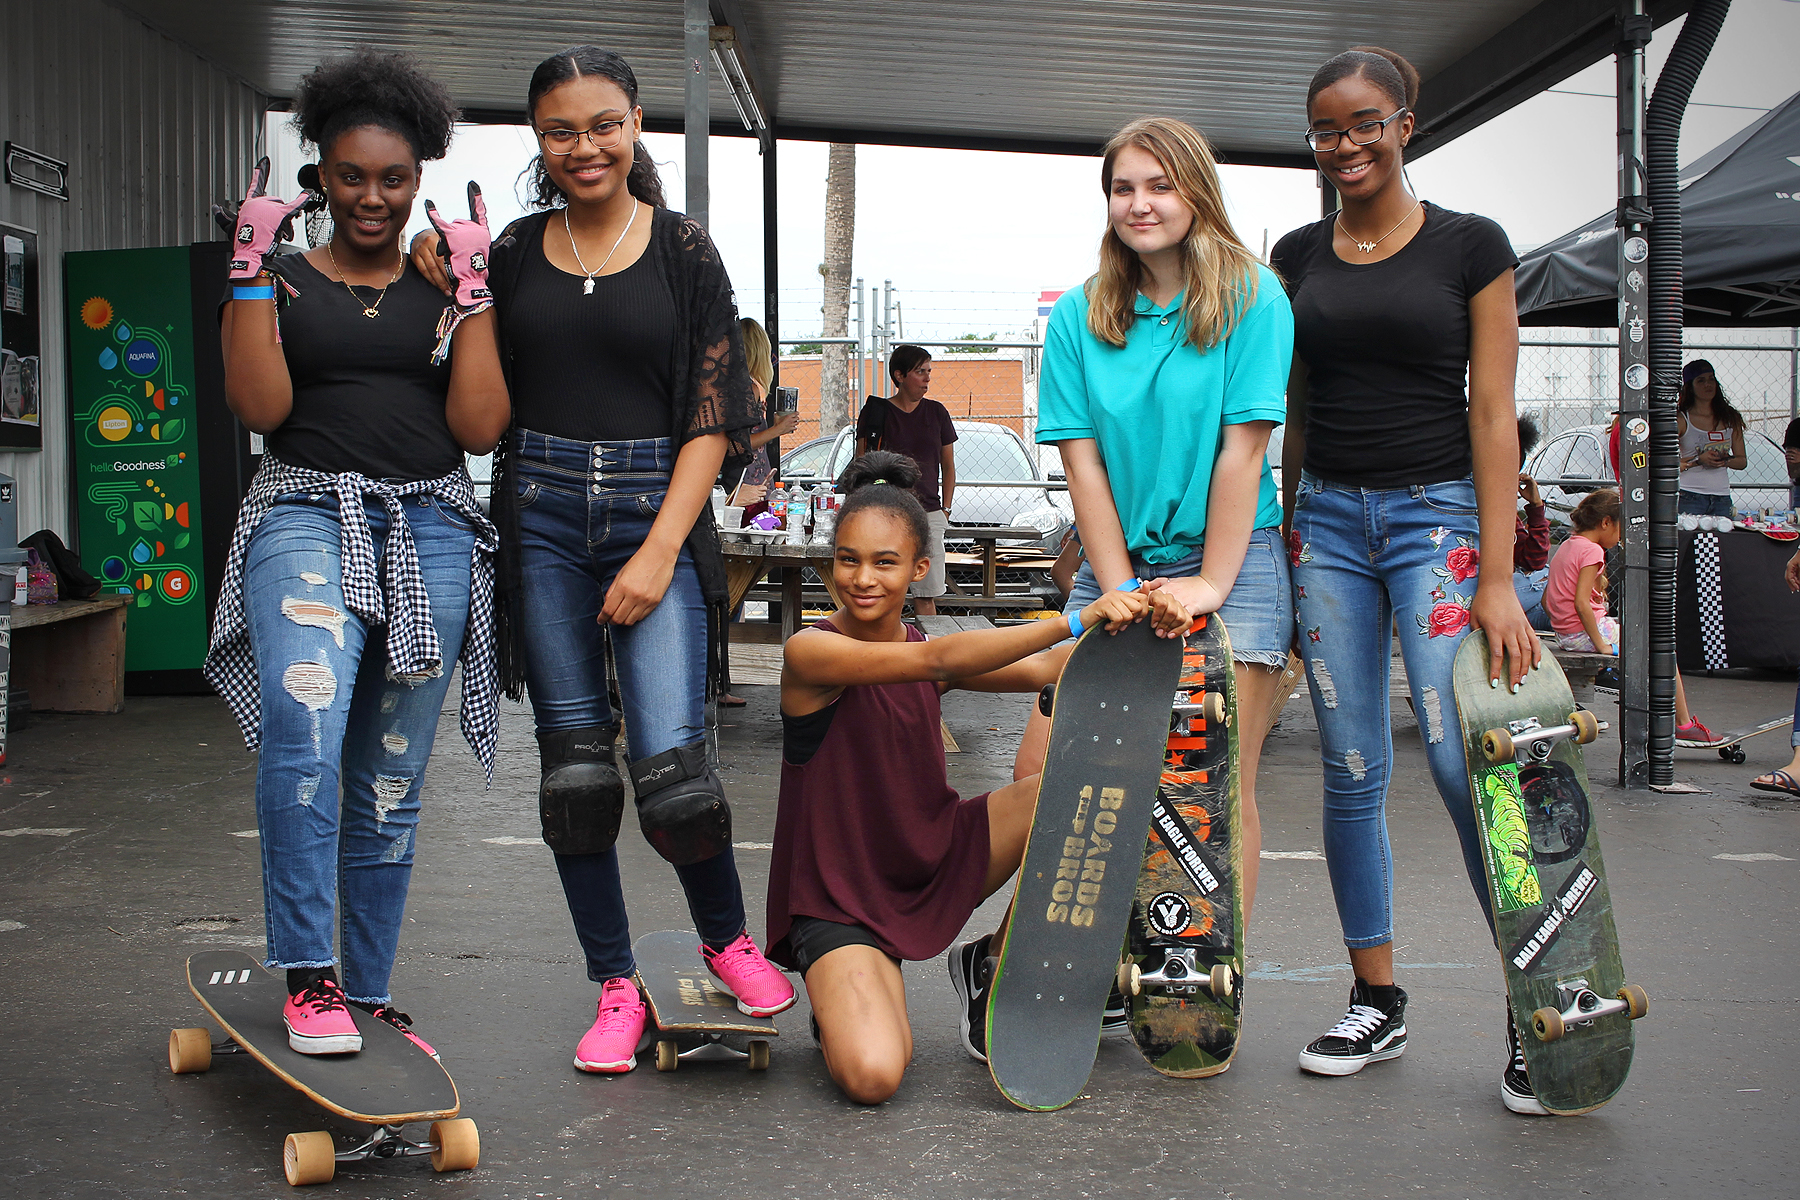 Photos From the Vans Girls Skate Clinic at SPoT | Skatepark of Tampa Photo